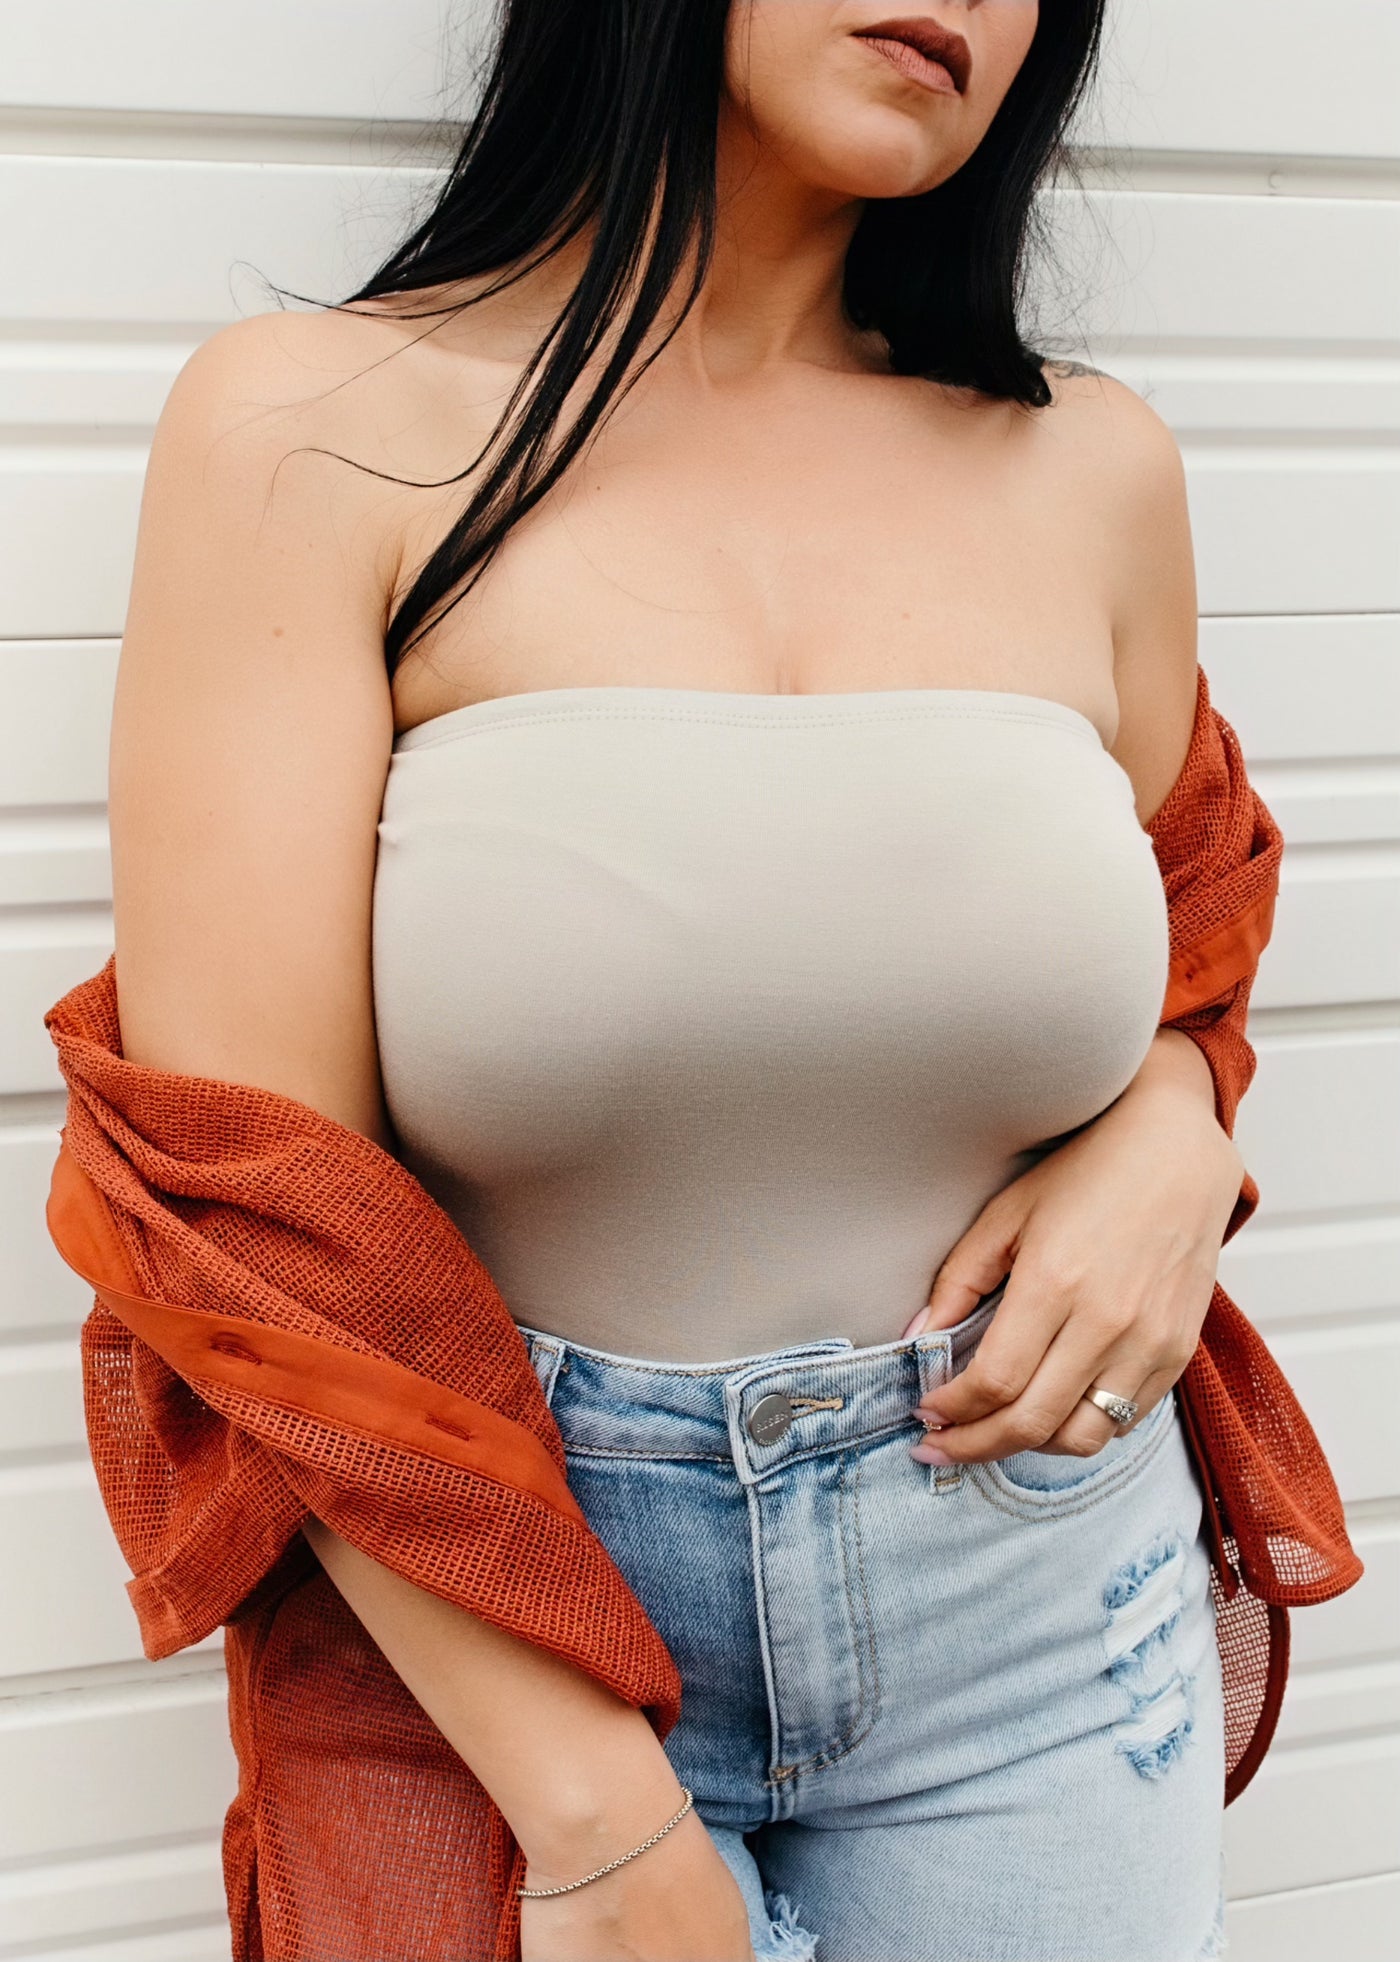 Putting It Simply - Jersey Tube Top